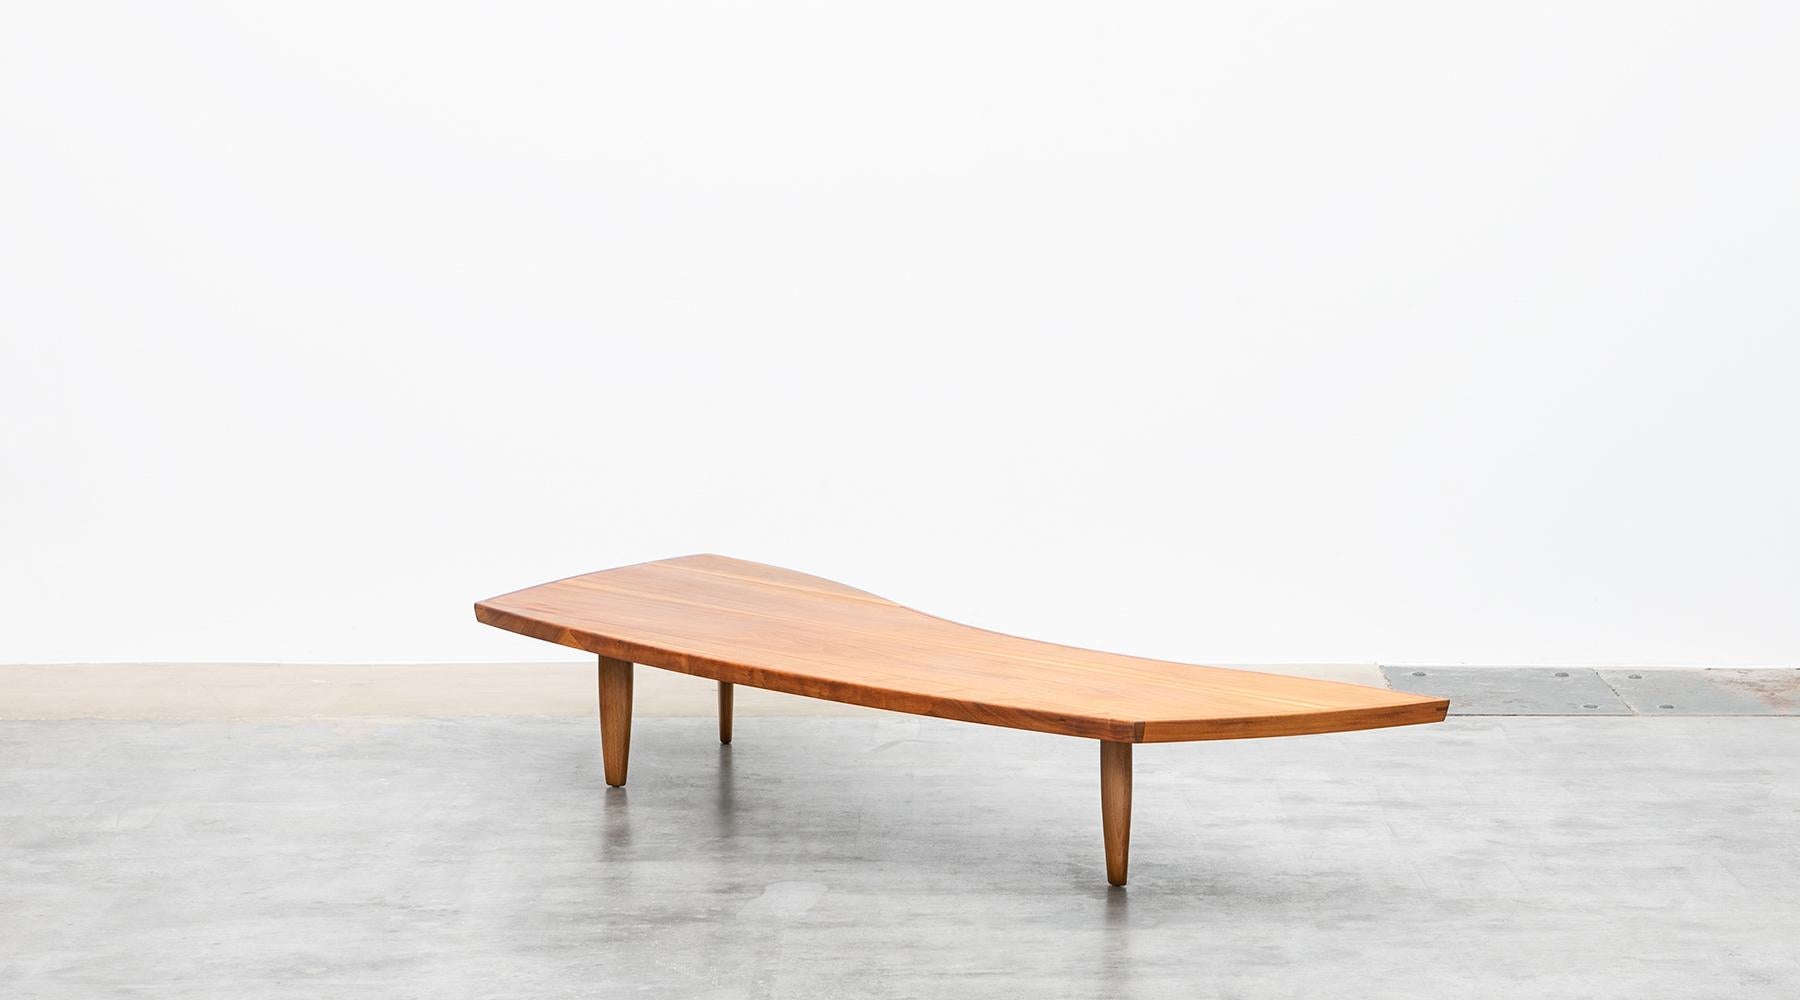 Coffee table, walnut veneer, George Nakashima, USA, 1960.

The handcrafted coffee table comes with a walnut veneer top and is supported by four tapered dowel legs. The table is designed by famous American George Nakashima and can also be used as a